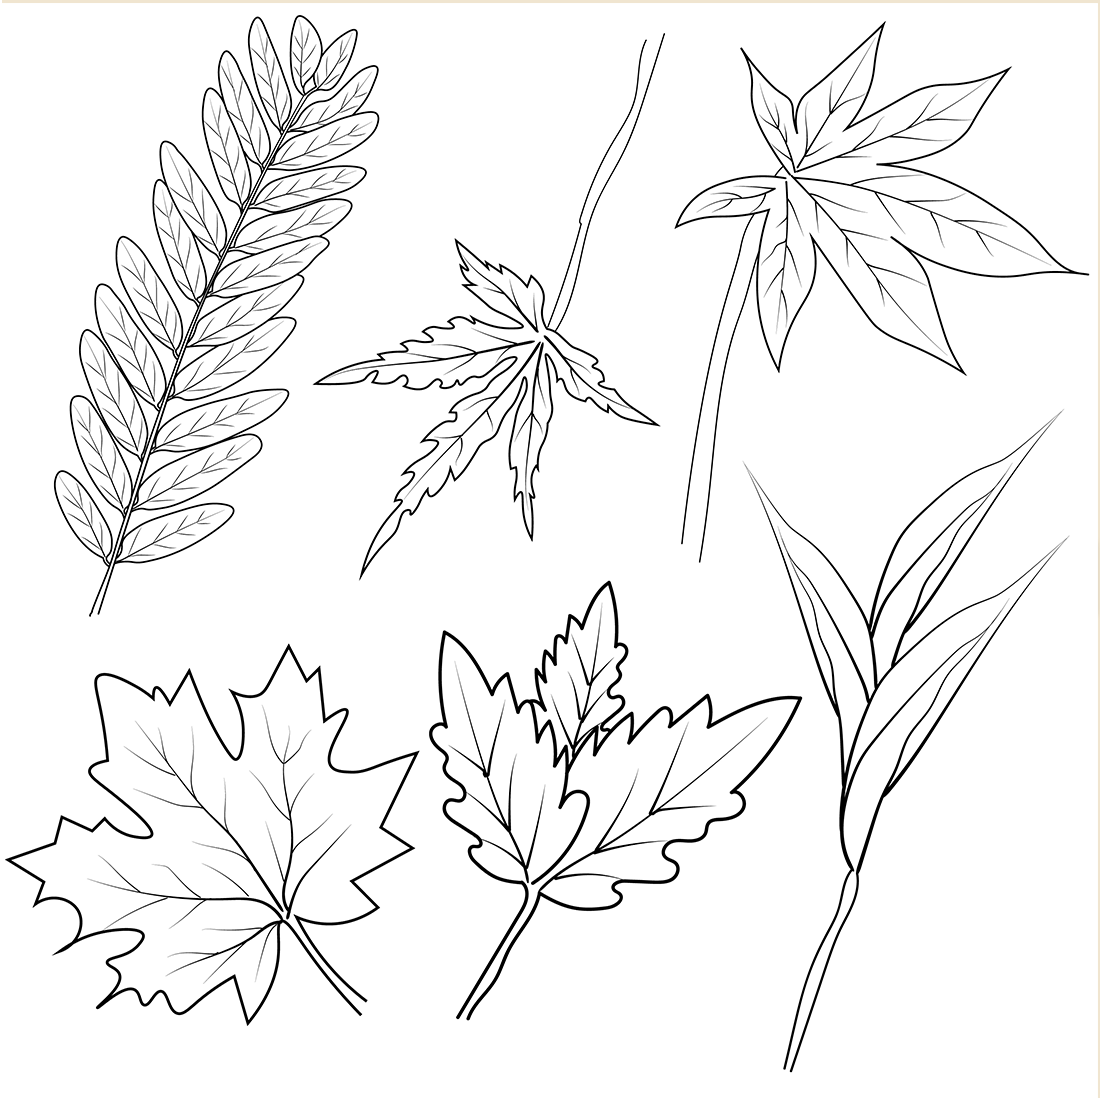 How to Draw Leaf Step by Step Guide - Drawing All